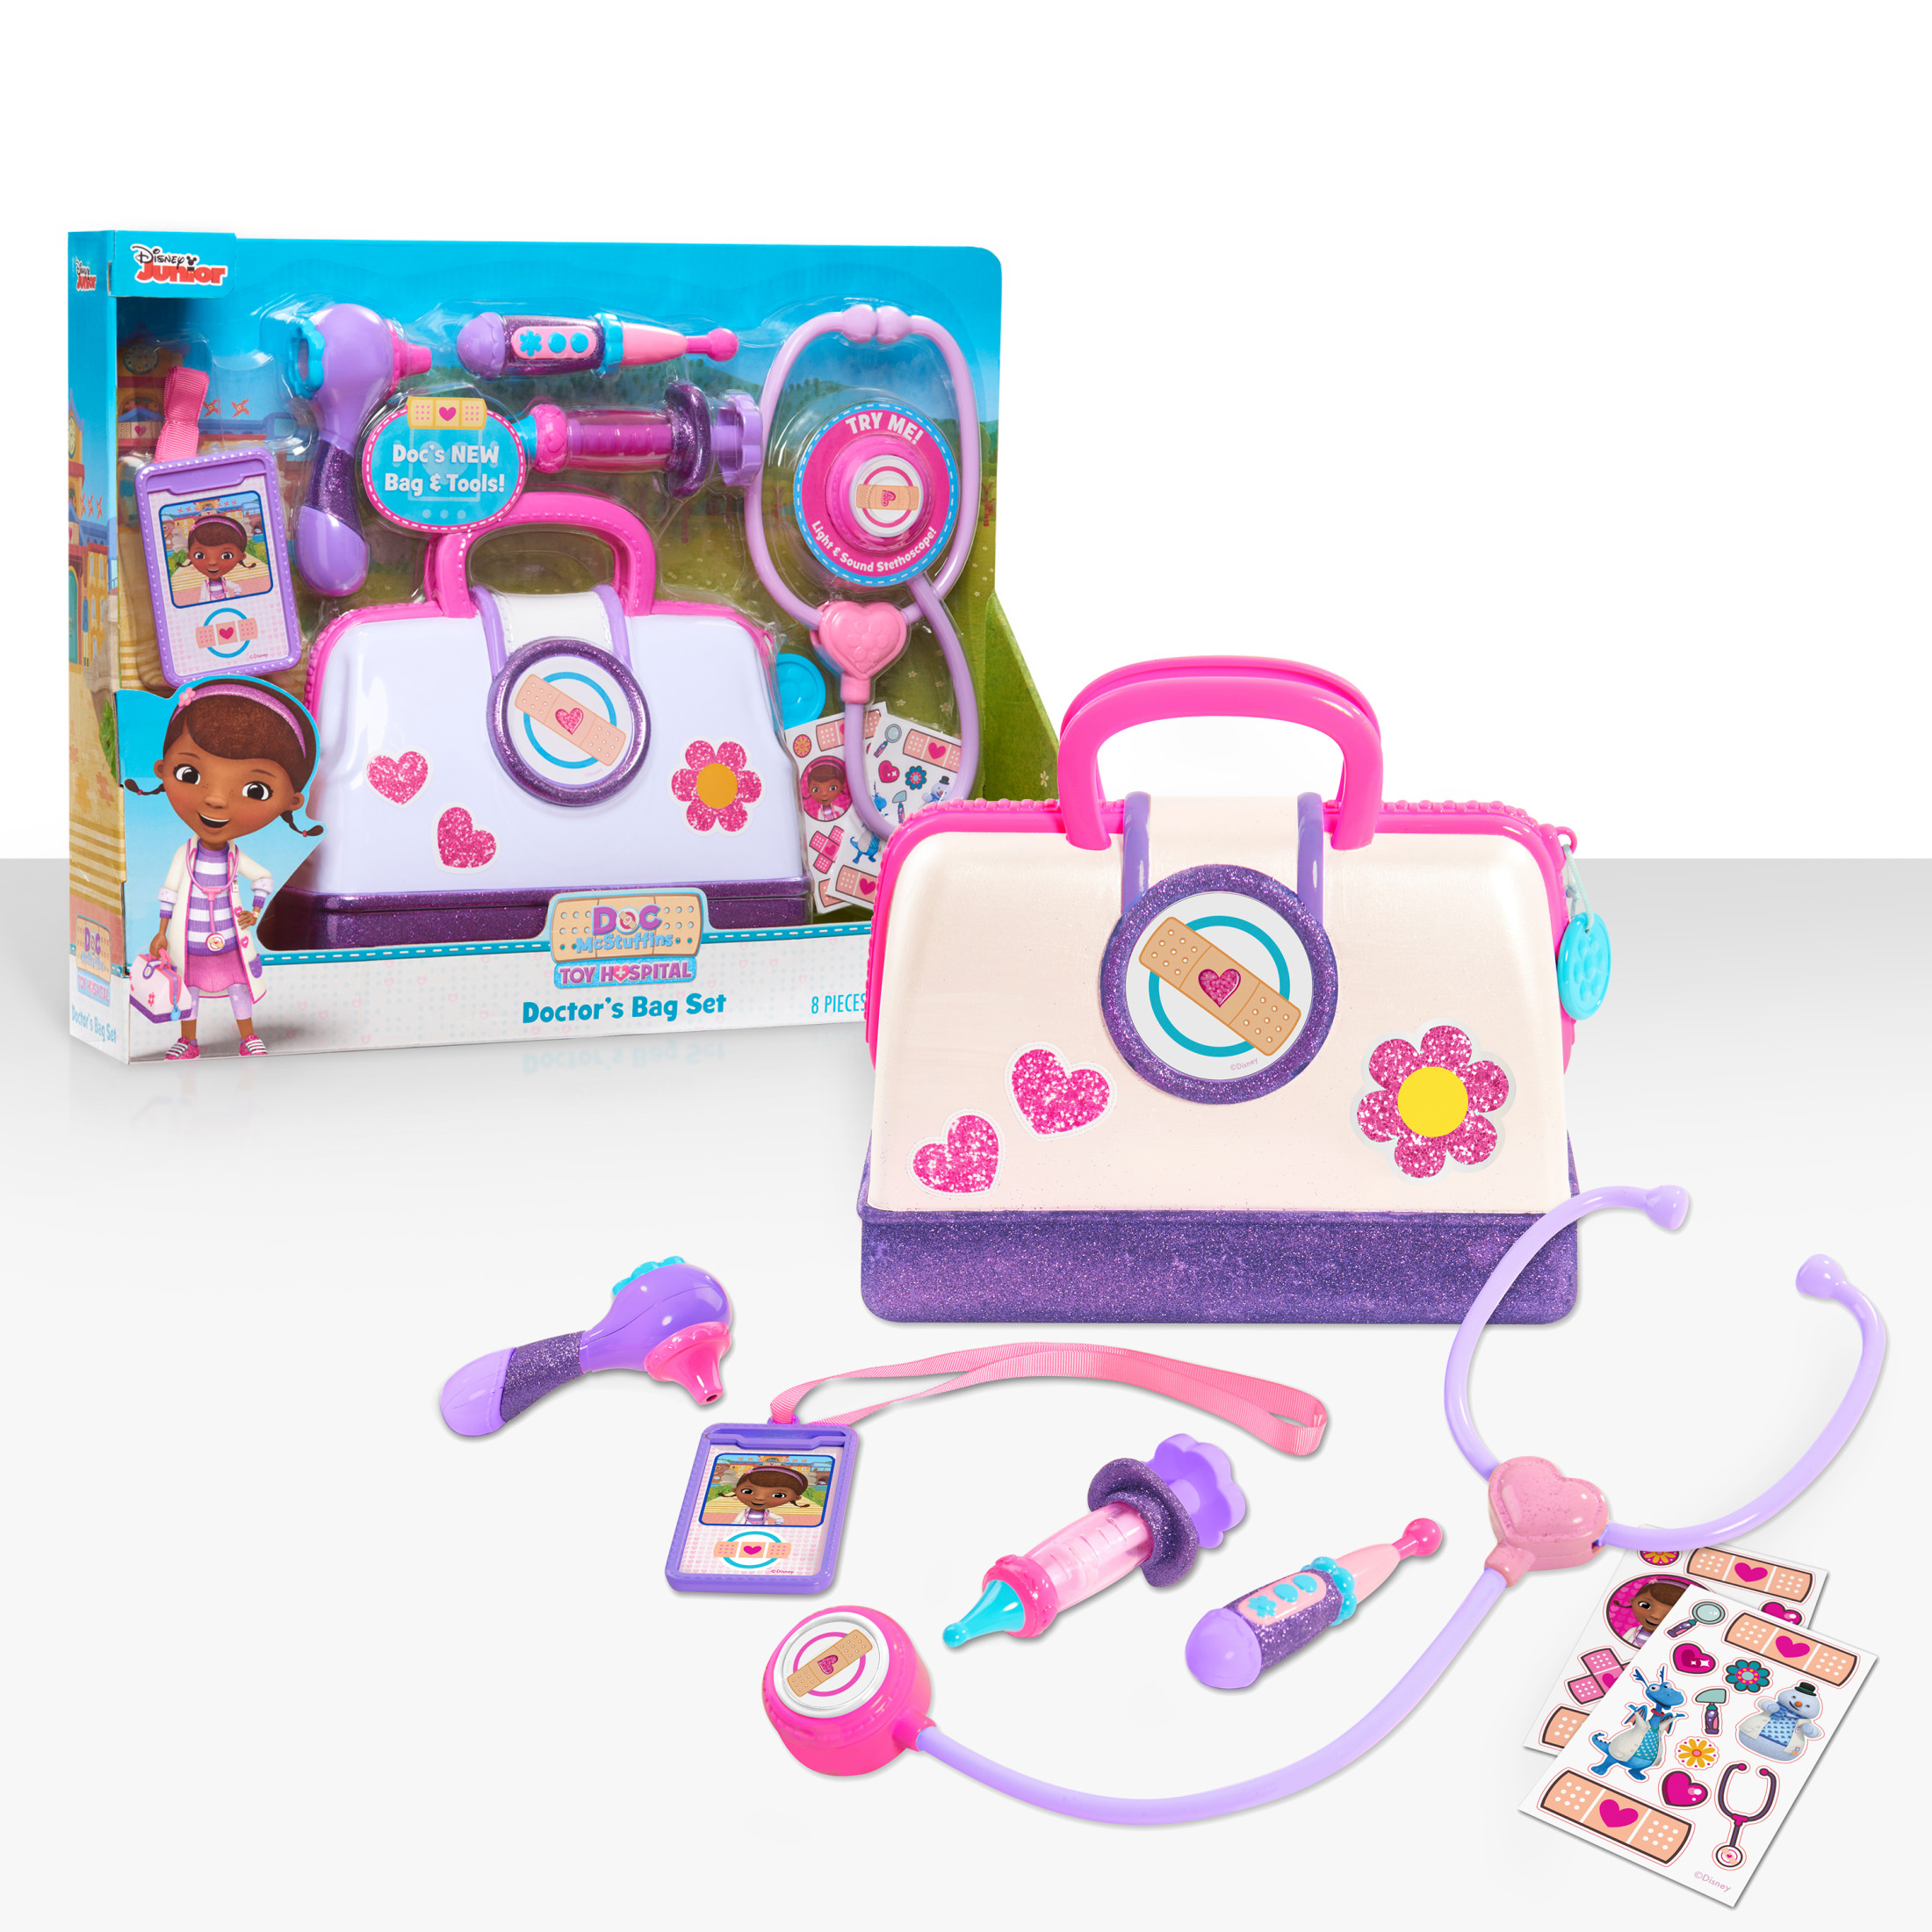 Disney Junior Doc McStuffins Toy Hospital Doctor's Bag Set, 7-piece Dress Up and Pretend Play Doctor Kit, Kids Toys for Ages 3 up - image 1 of 8